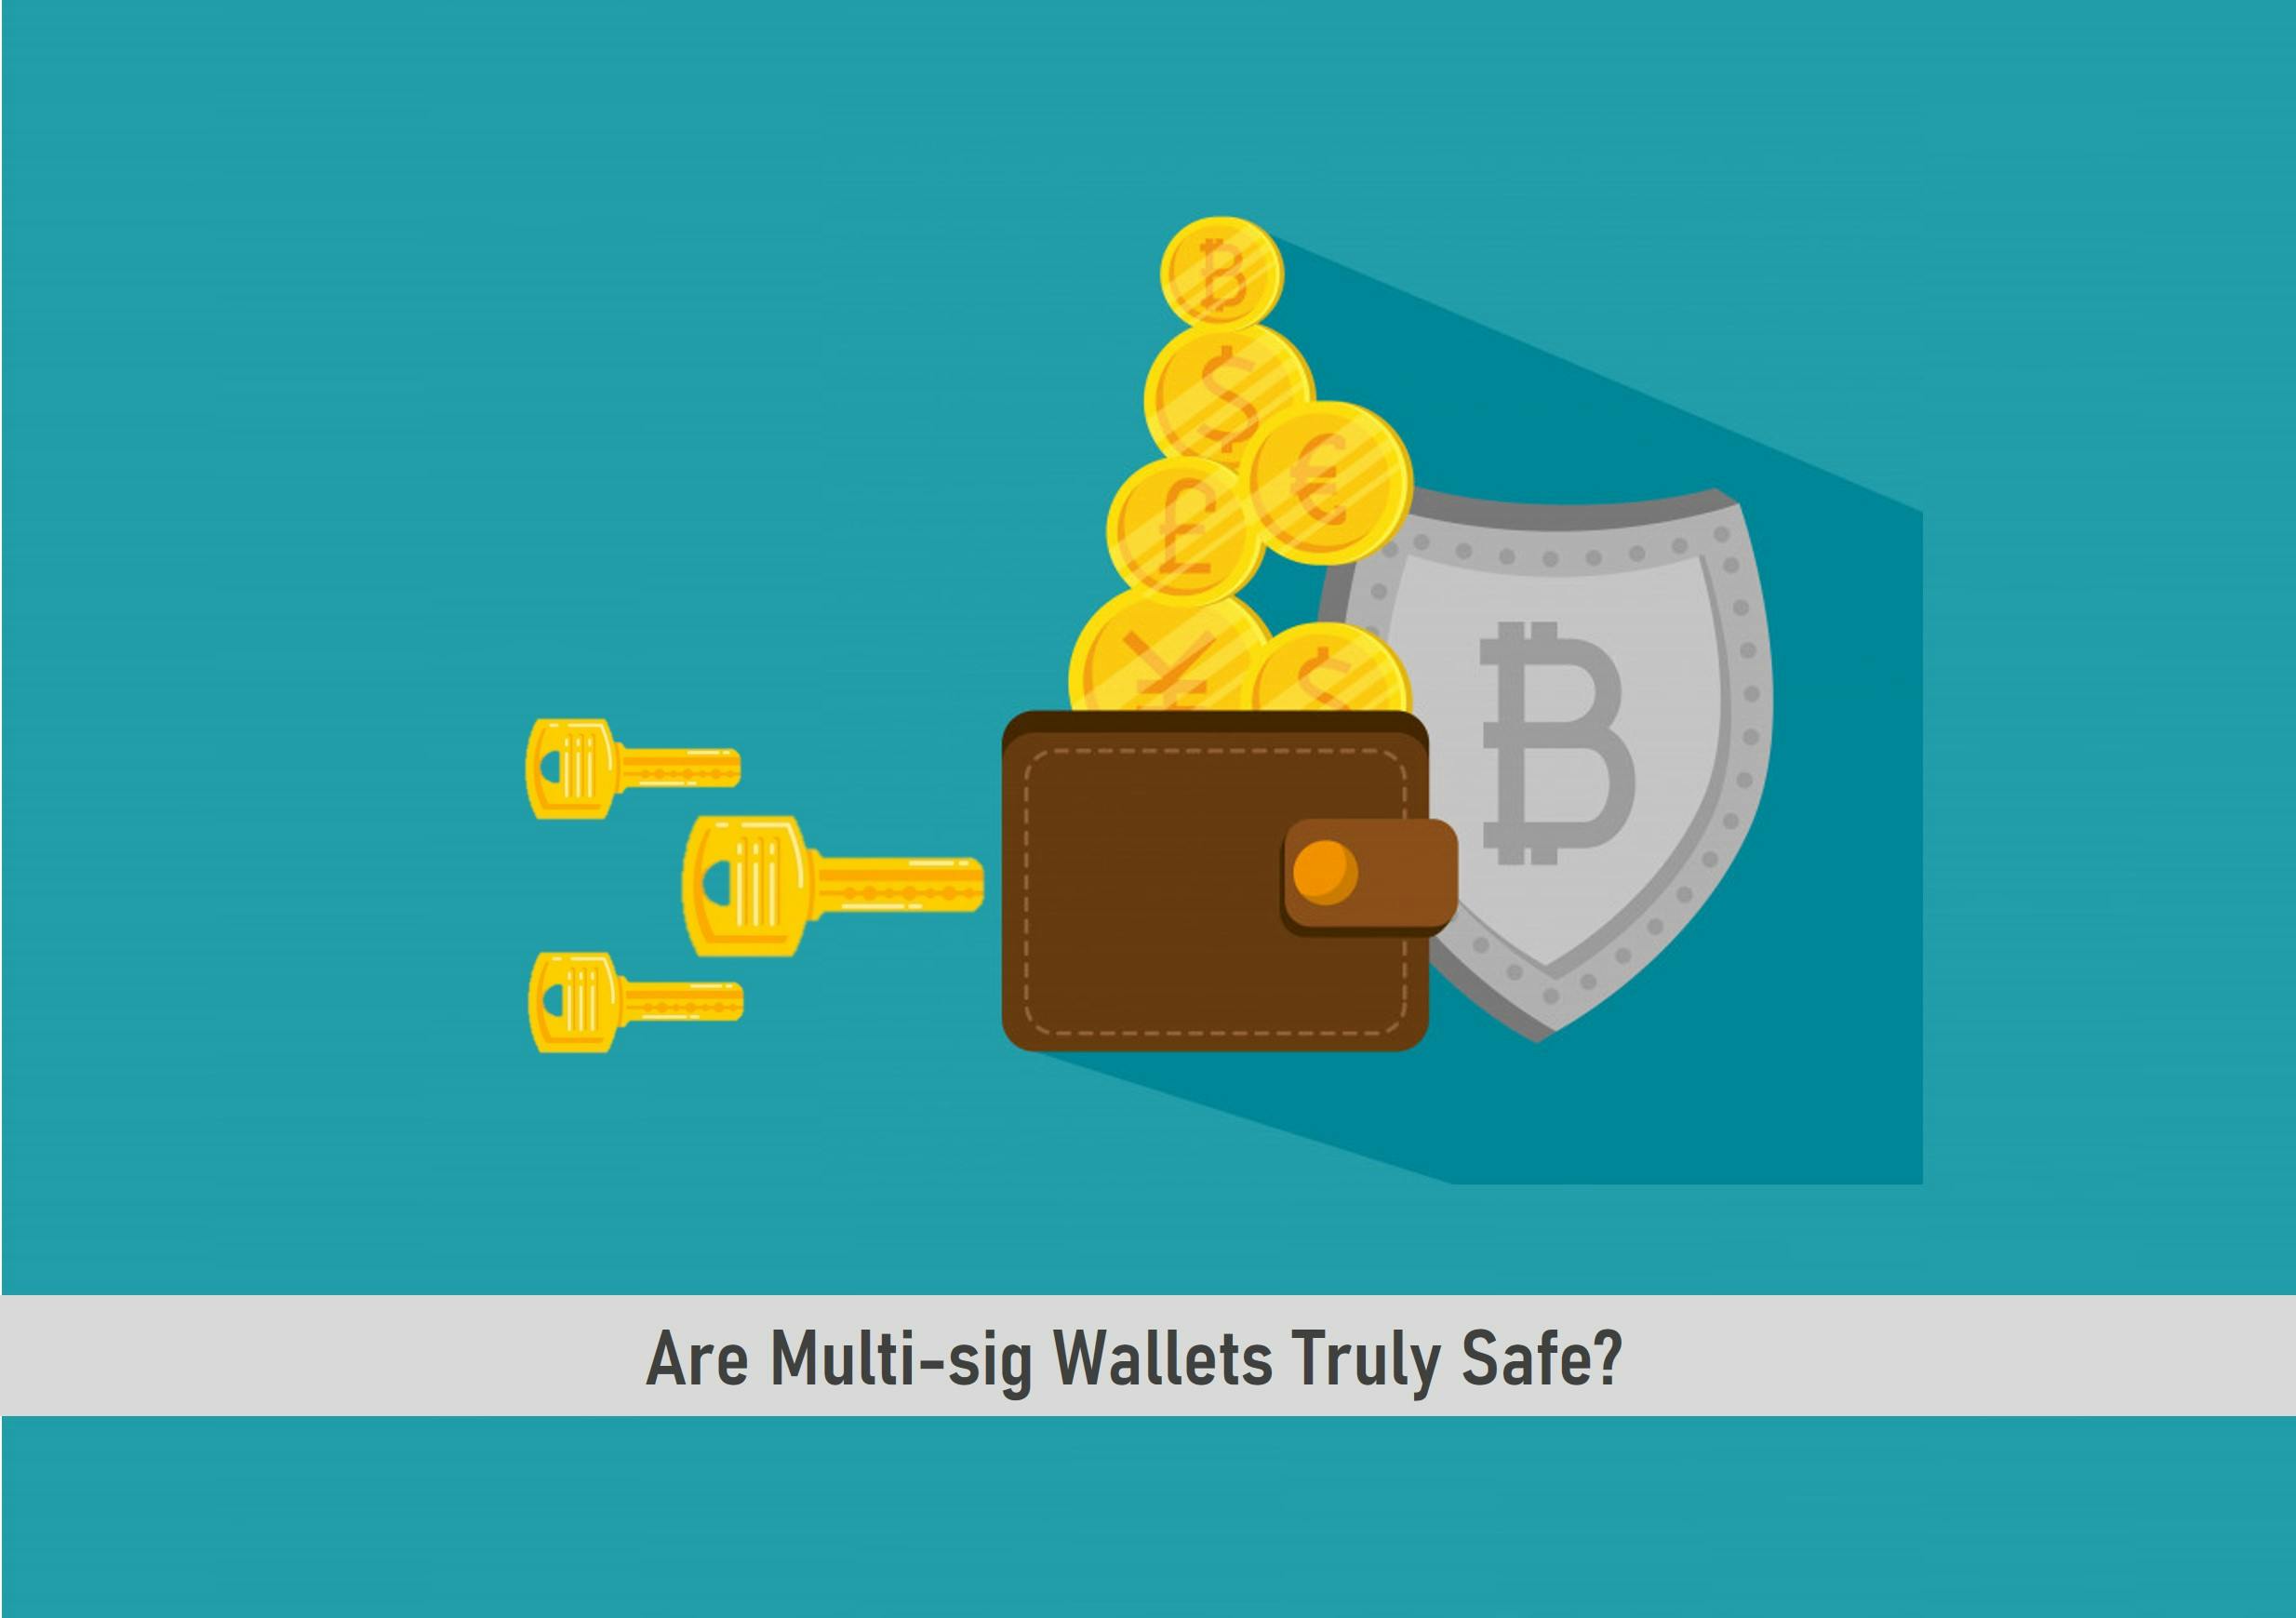 Are Multi-sig Wallets Truly Safe?